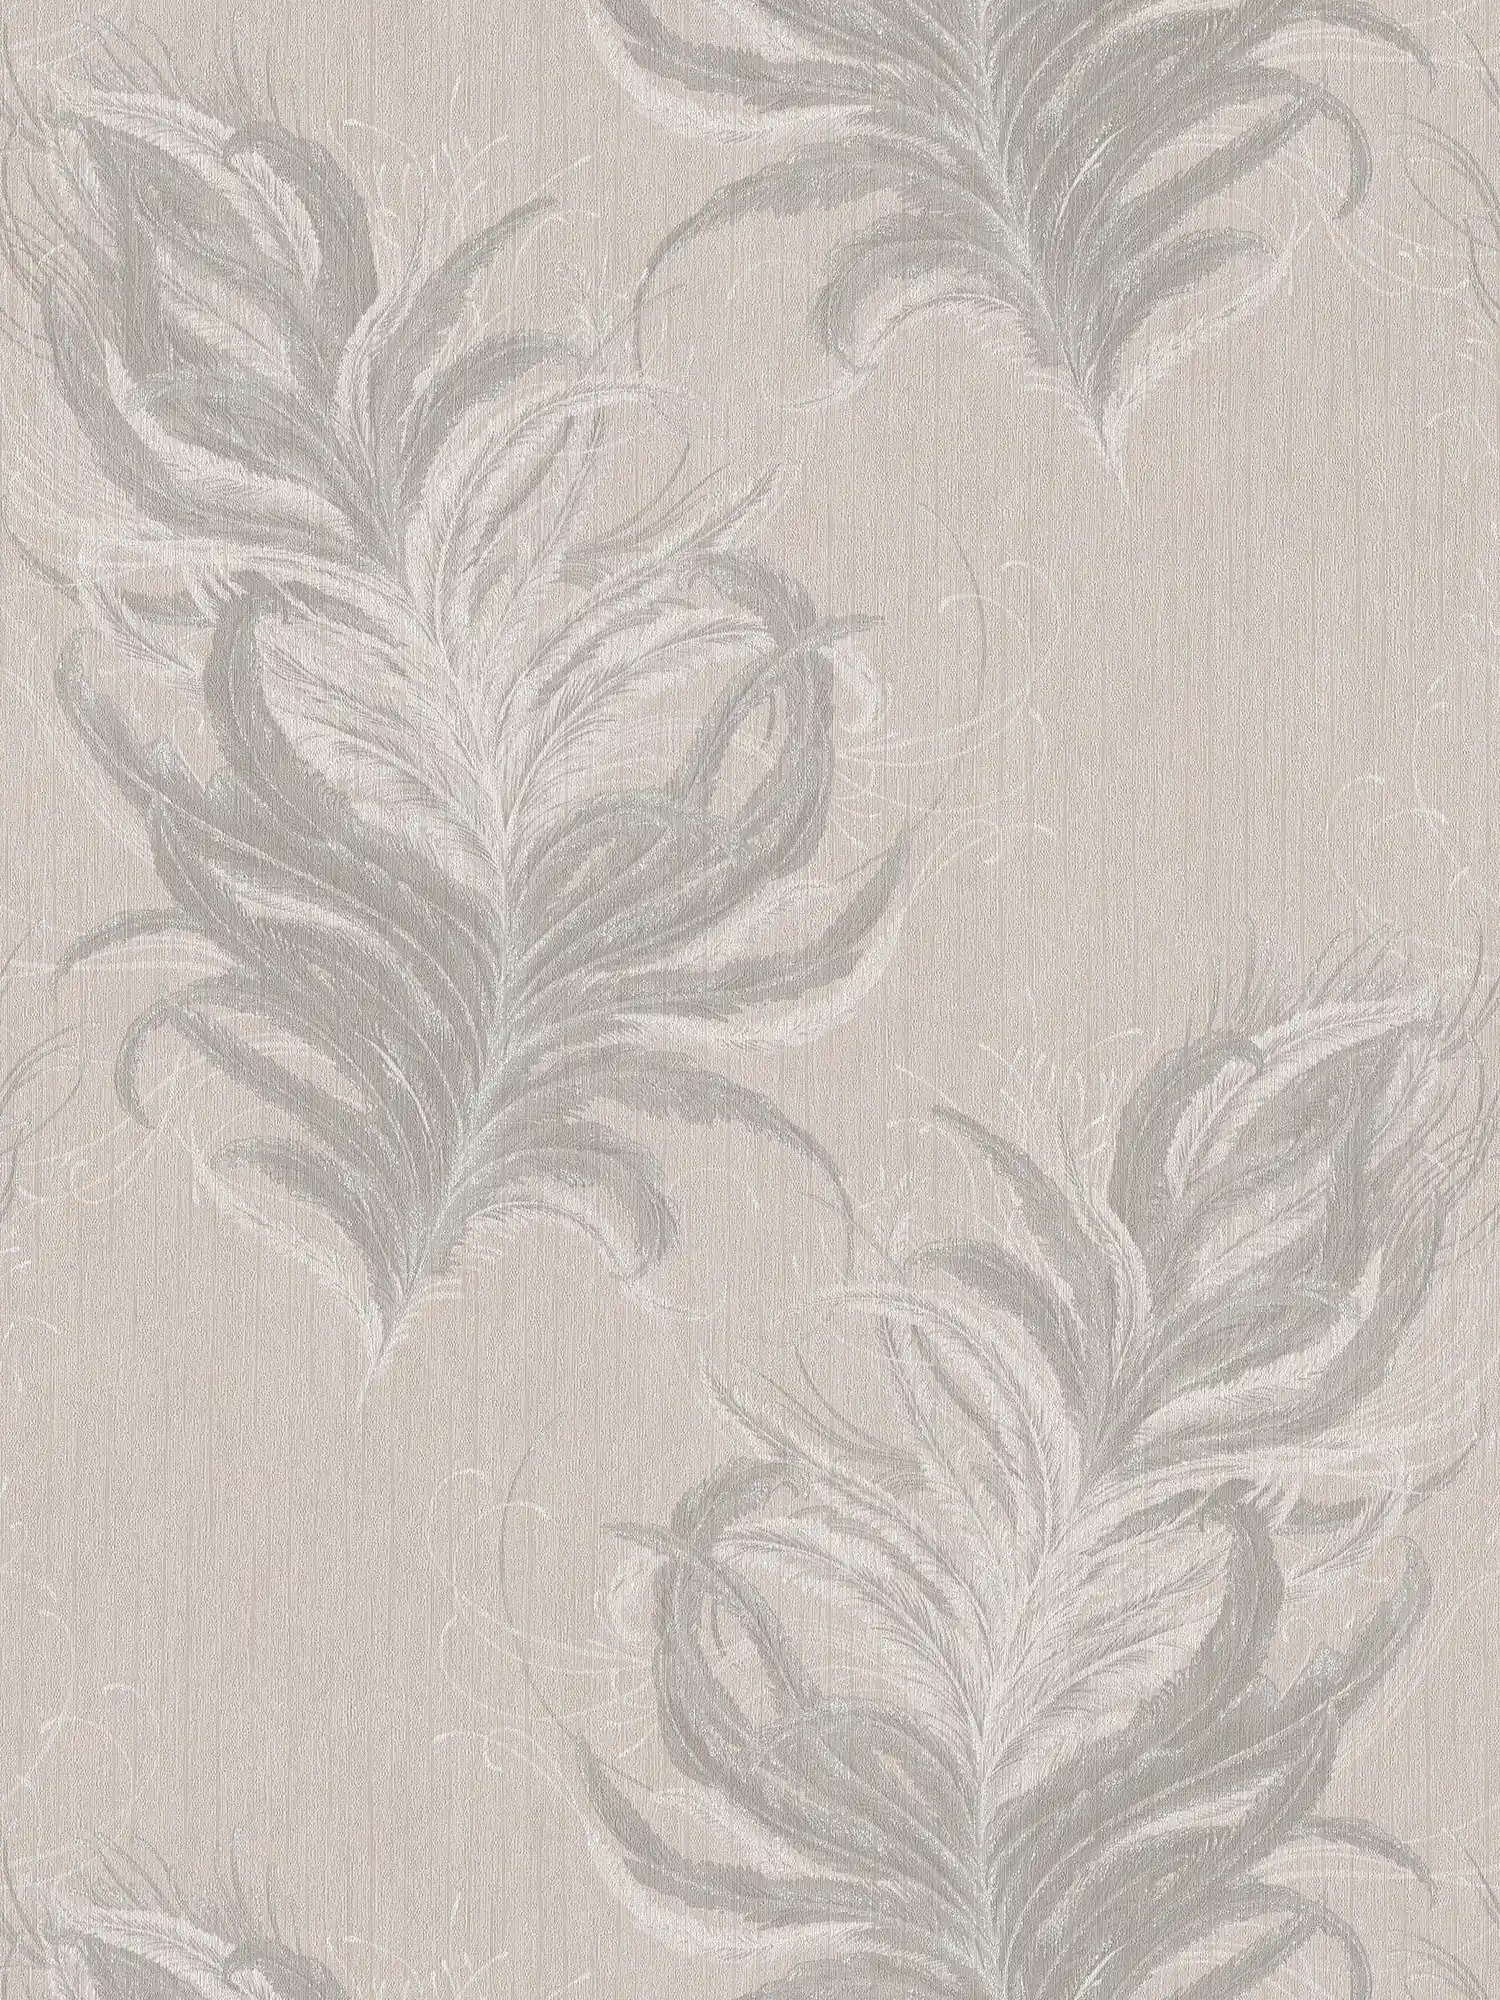 Non-woven wallpaper with feathers design & structure gloss effect - grey, white
